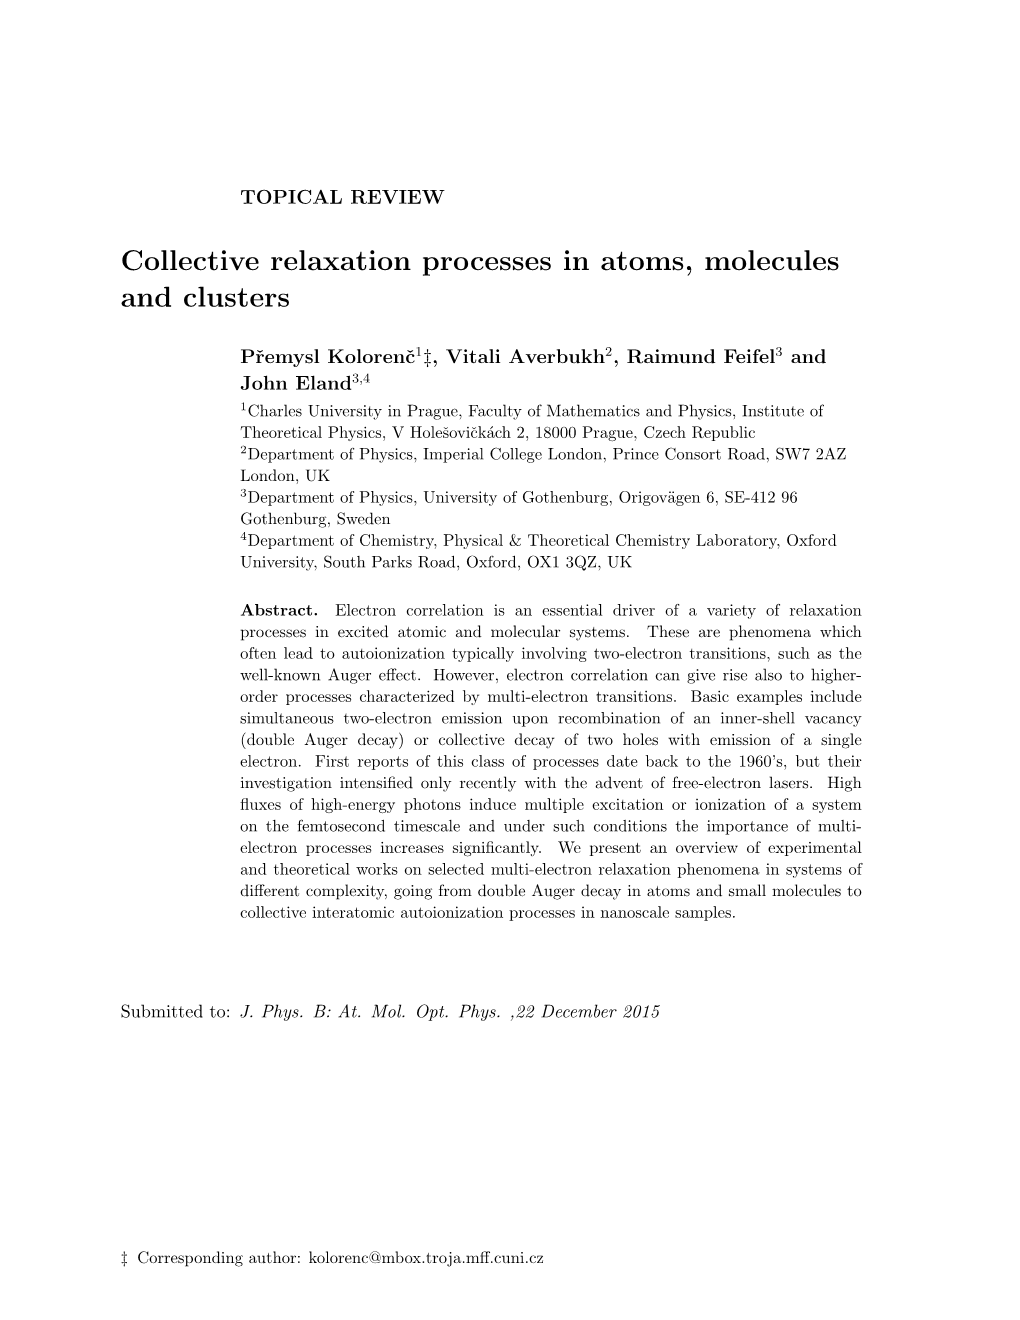 Collective Relaxation Processes in Atoms, Molecules and Clusters